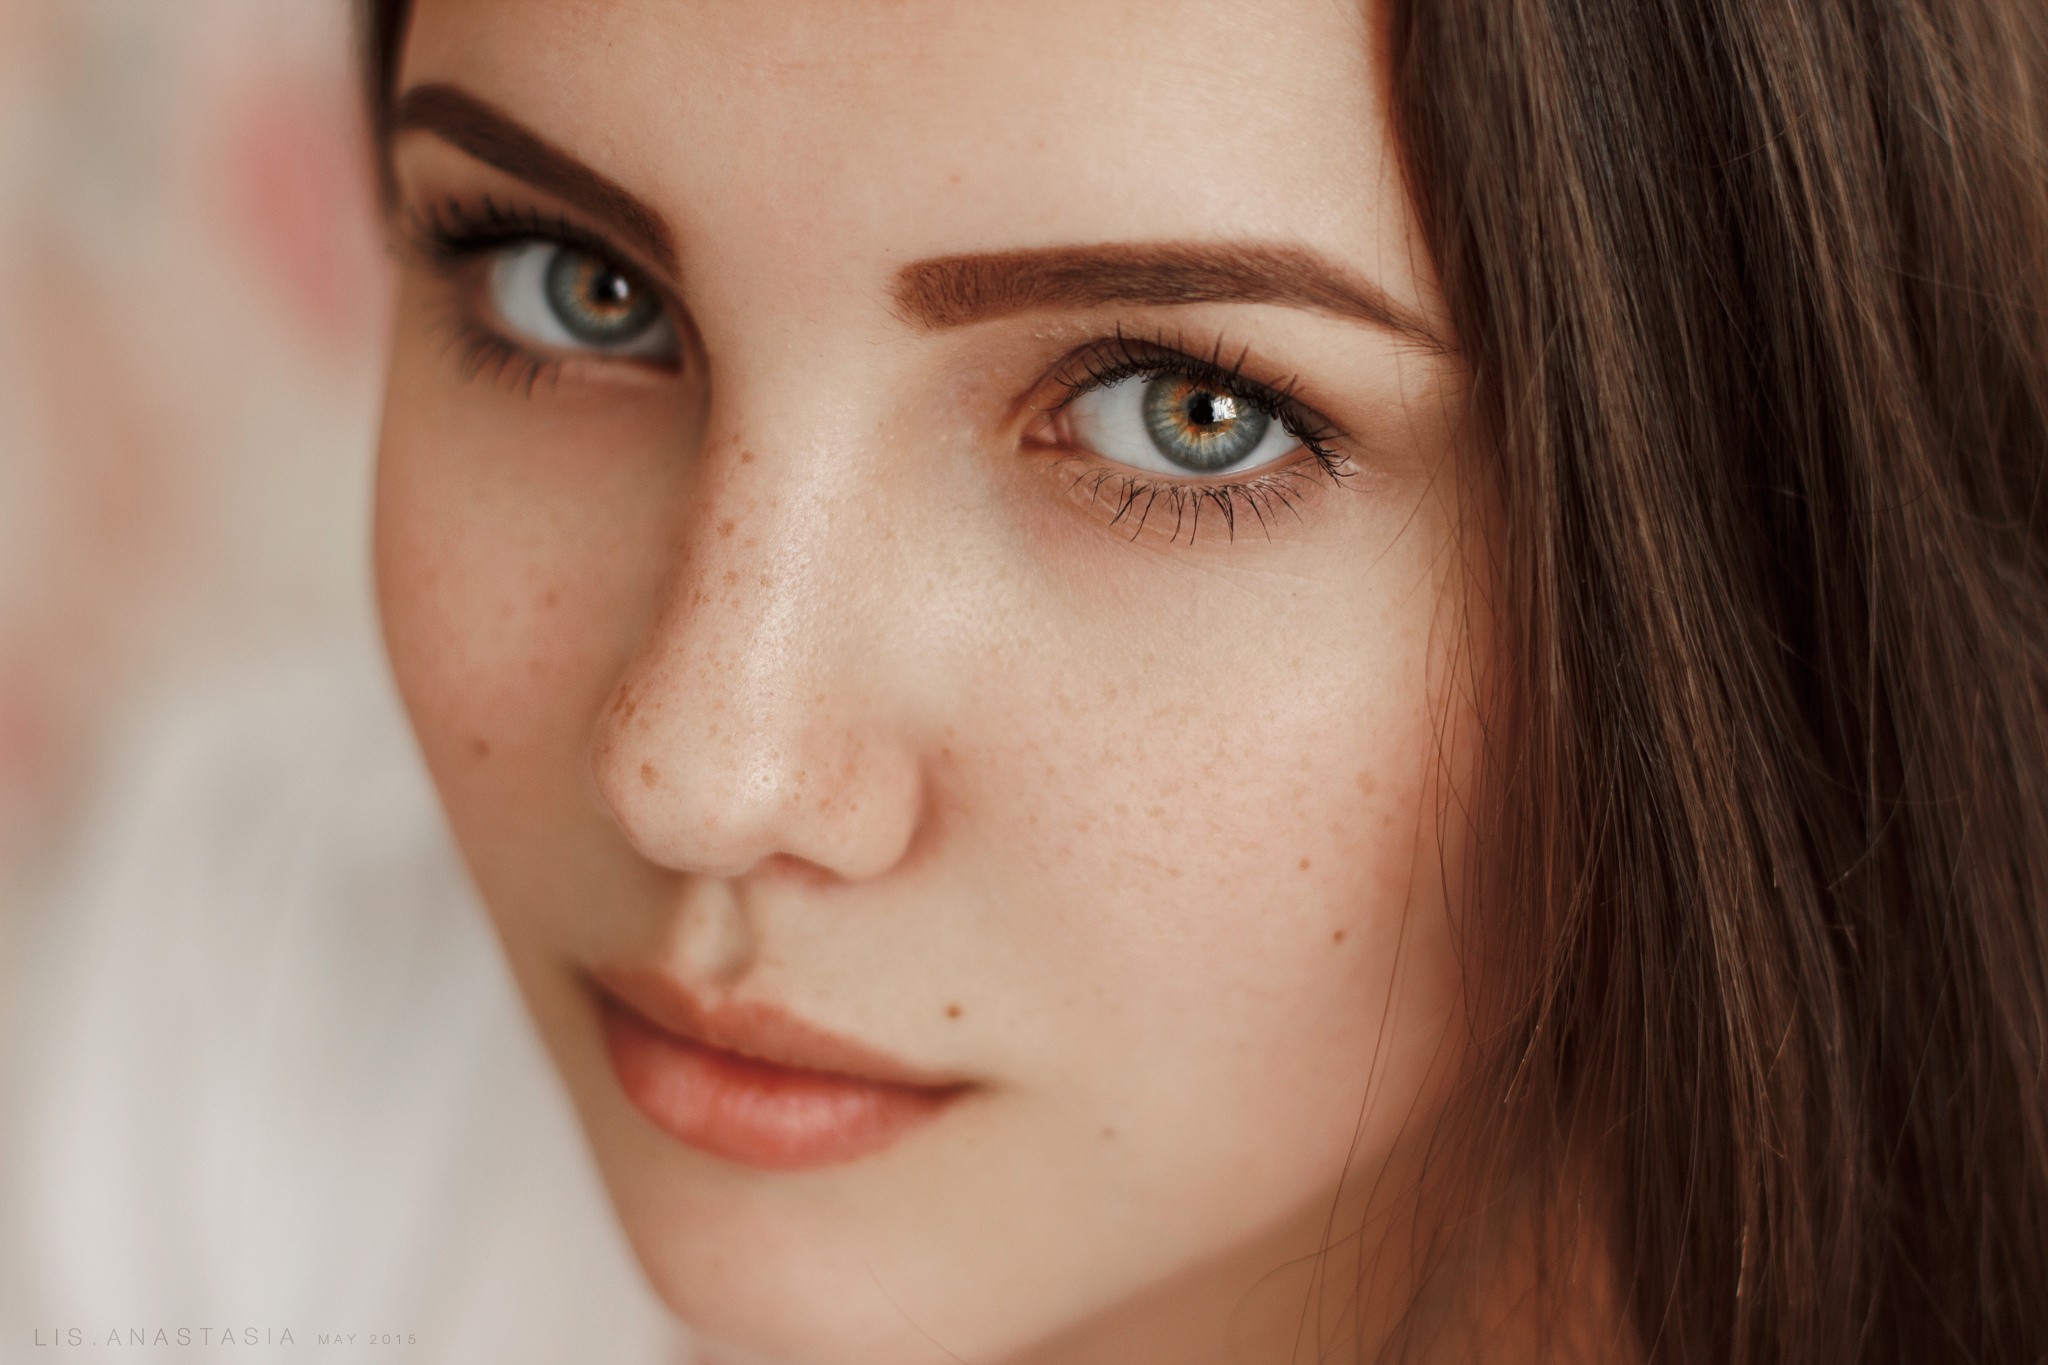 People 2048x1365 model face portrait brunette freckles green eyes closeup looking at viewer women indoors women Anastasia Lis young women